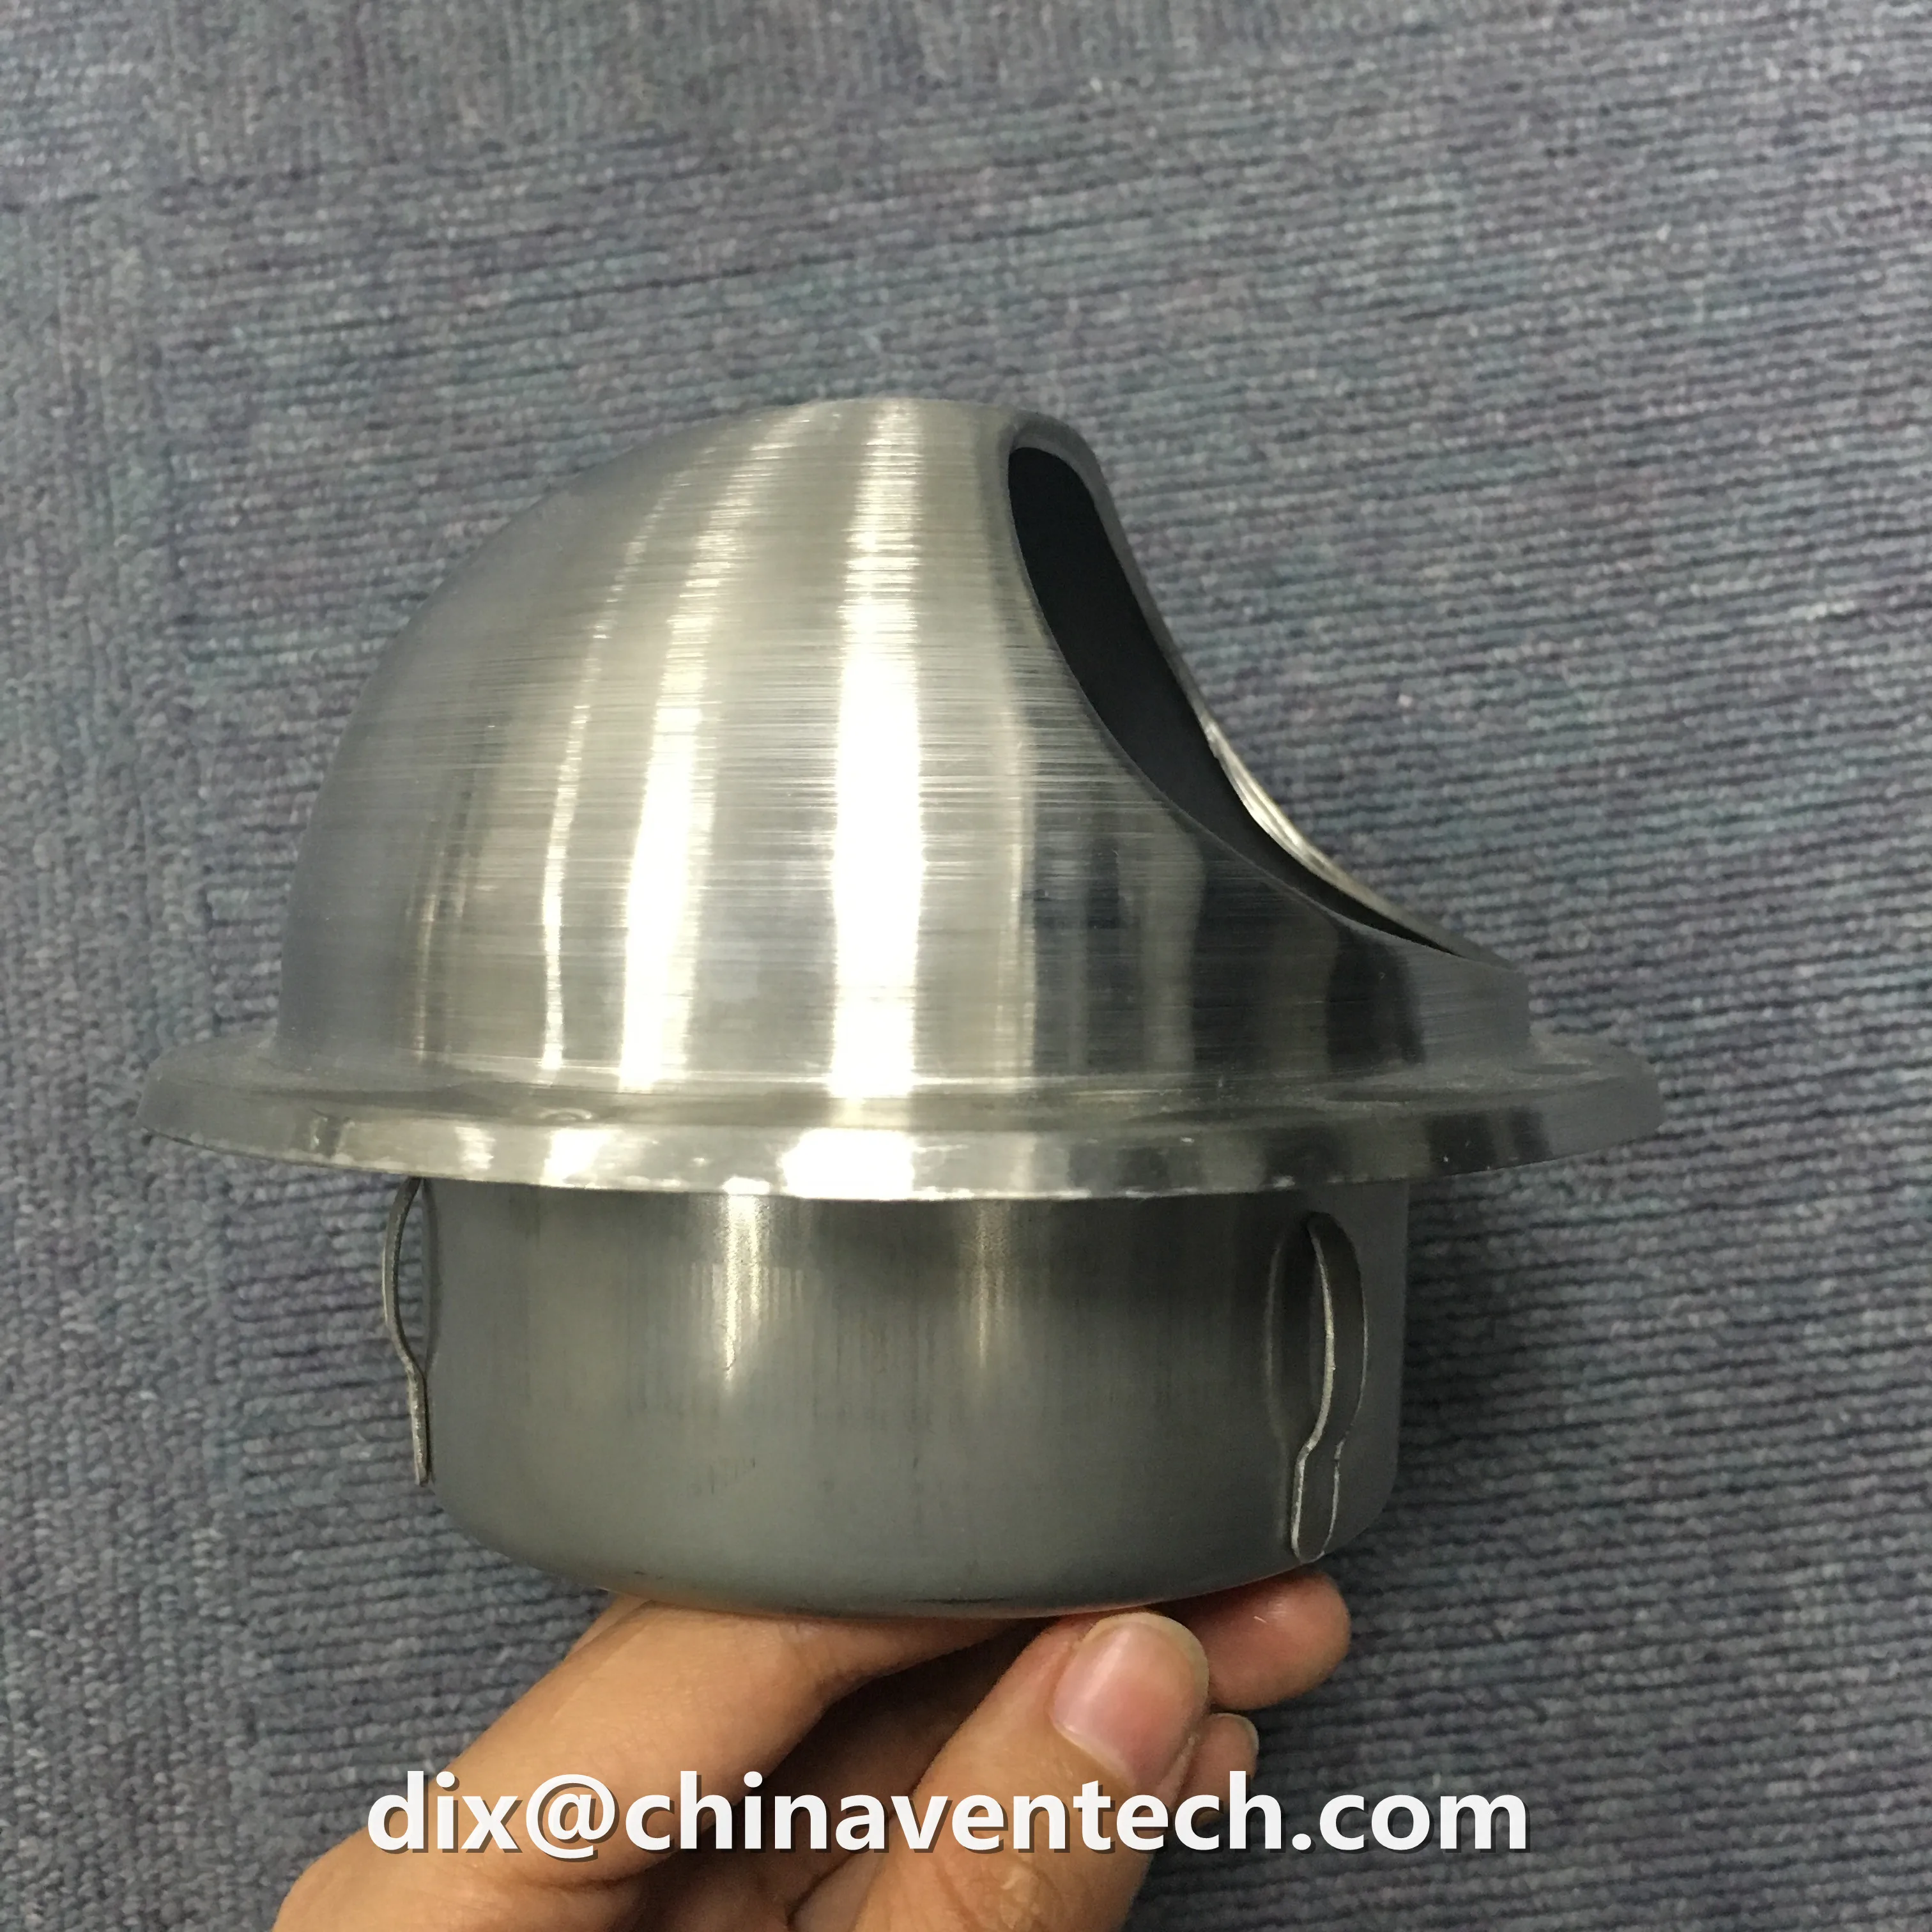 Hvac air conditioner flexible duct round air vent cap ball weather louver